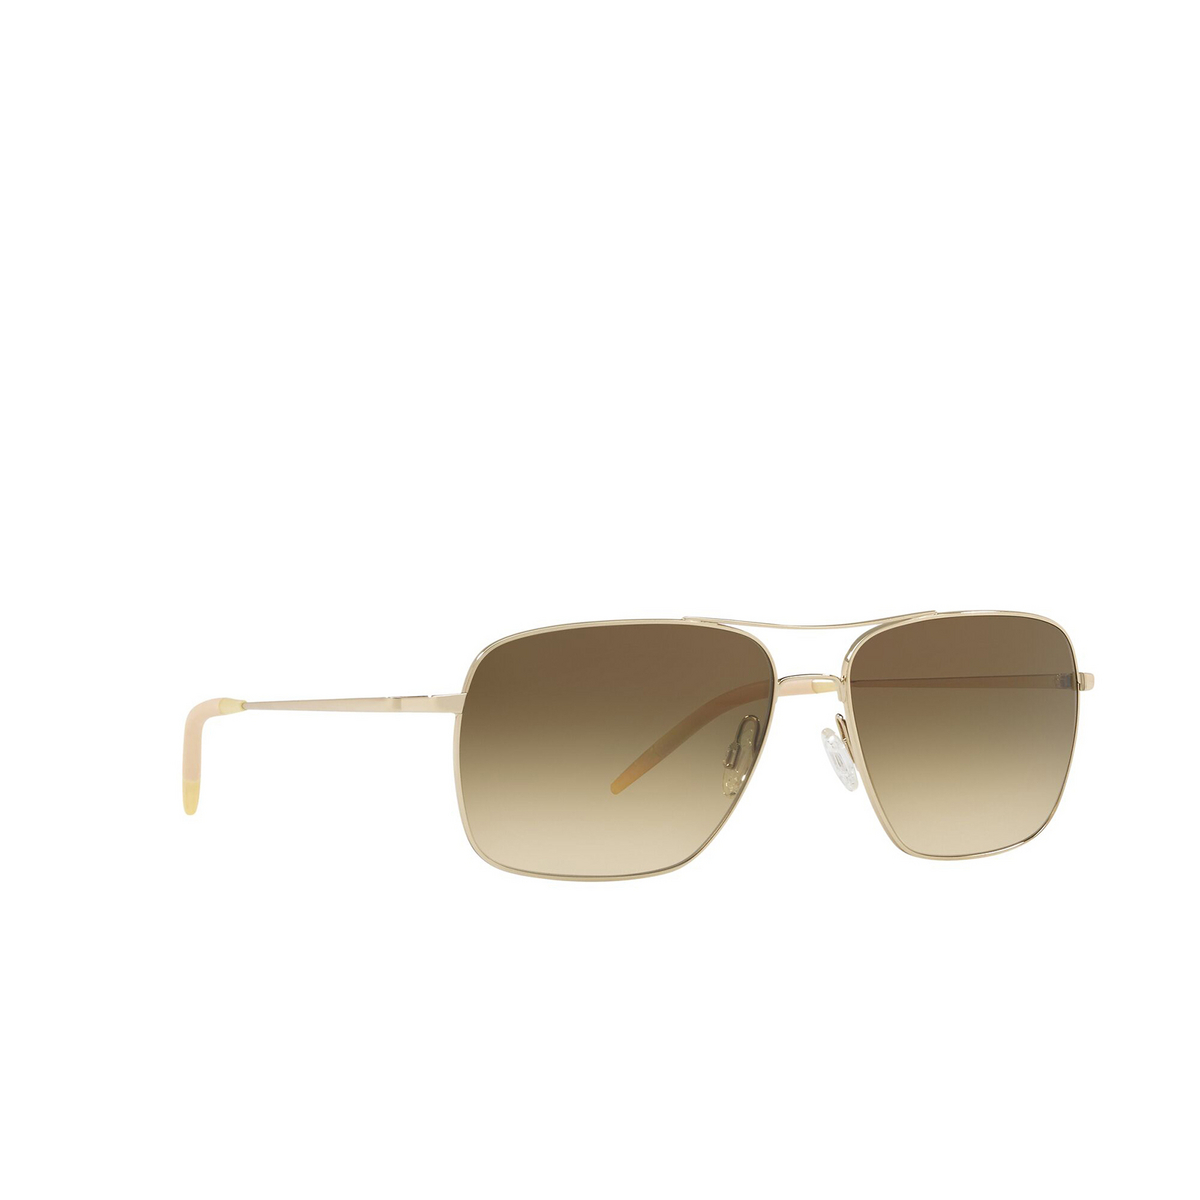 Oliver Peoples® Rectangle Sunglasses: Clifton OV1150S color Gold 503585 - three-quarters view.